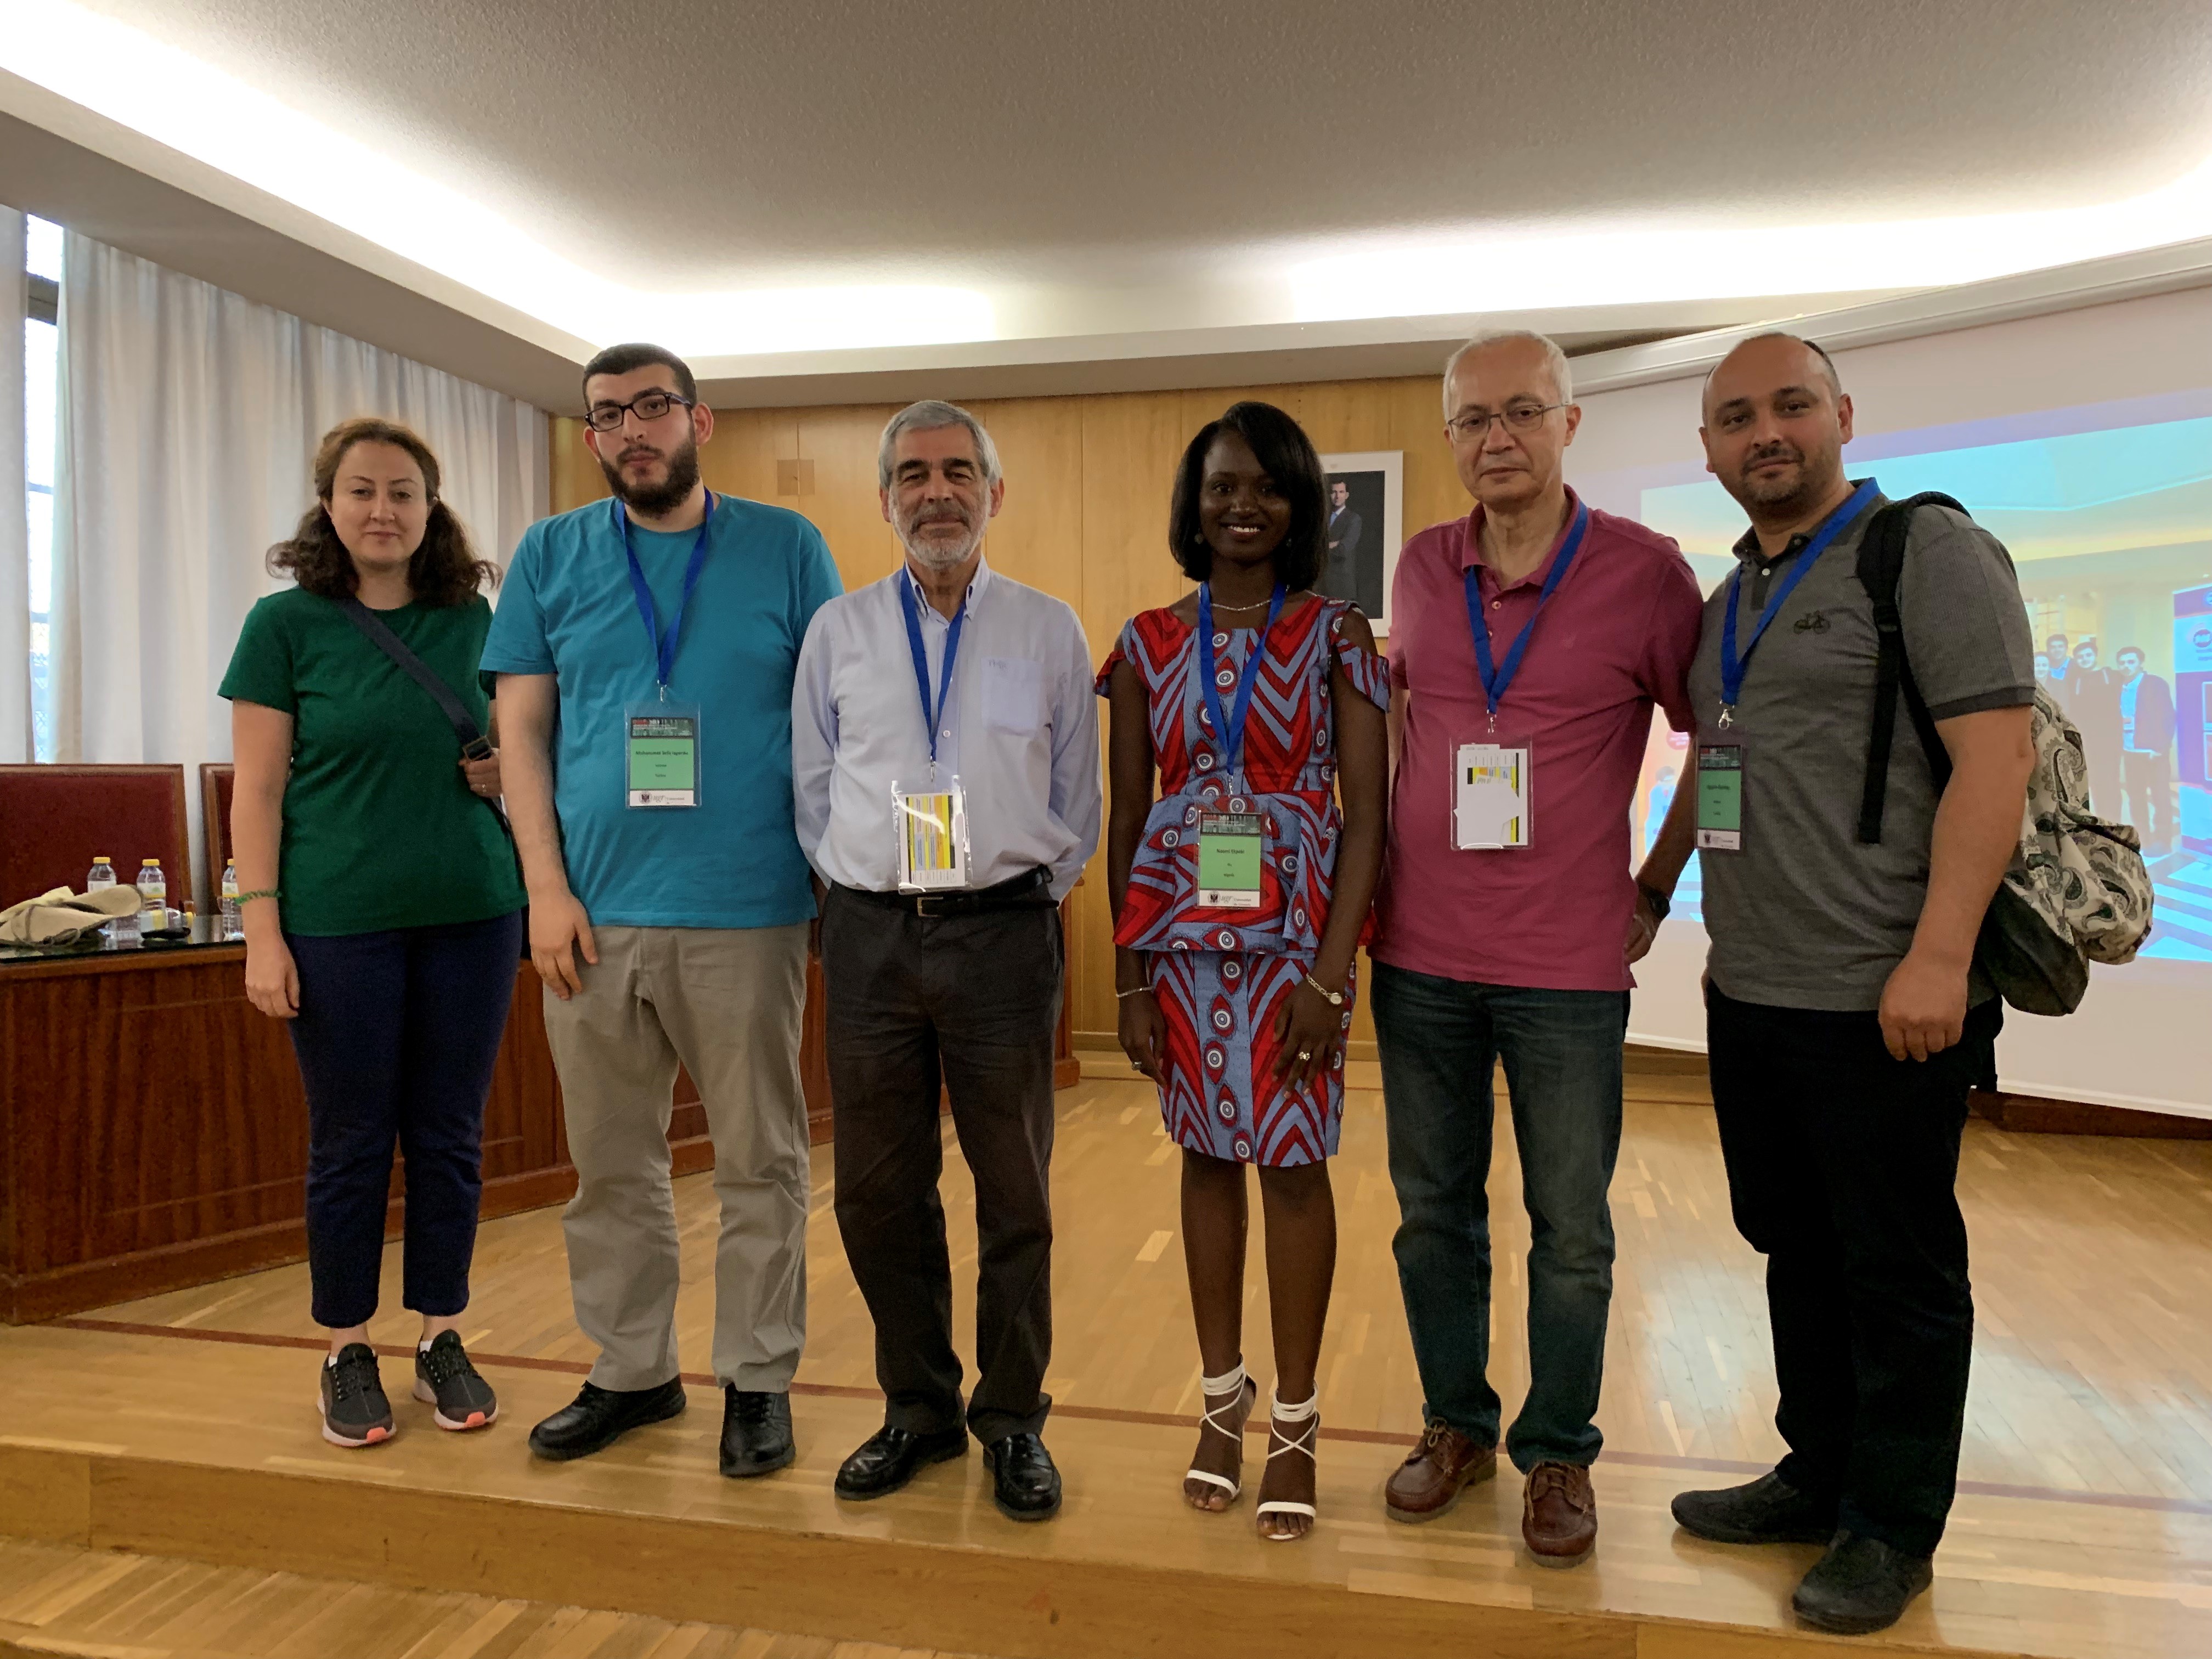 Our Undergraduate Student Presented His Thesis at IWBBIO 2019 Conference in Spain